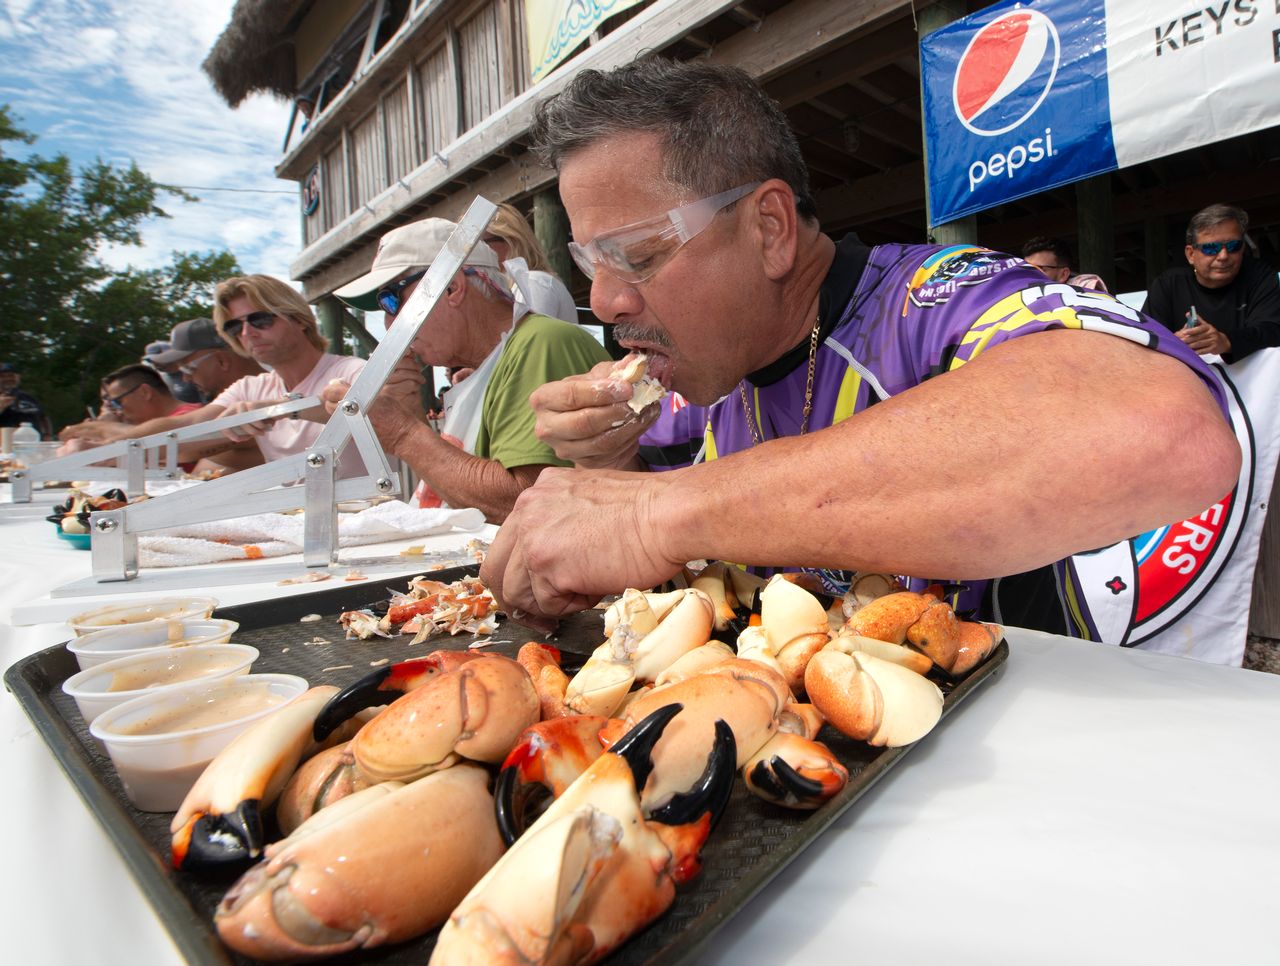 Juan Mallen consumes 25 stone crab claws in 14 minutes and 29 seconds to win the individual division of the 2021 Keys Fisheries Stone Crab Claw Eating Contest in Marathon, Fla. Image: Andy Newman/Florida Keys News Bureau